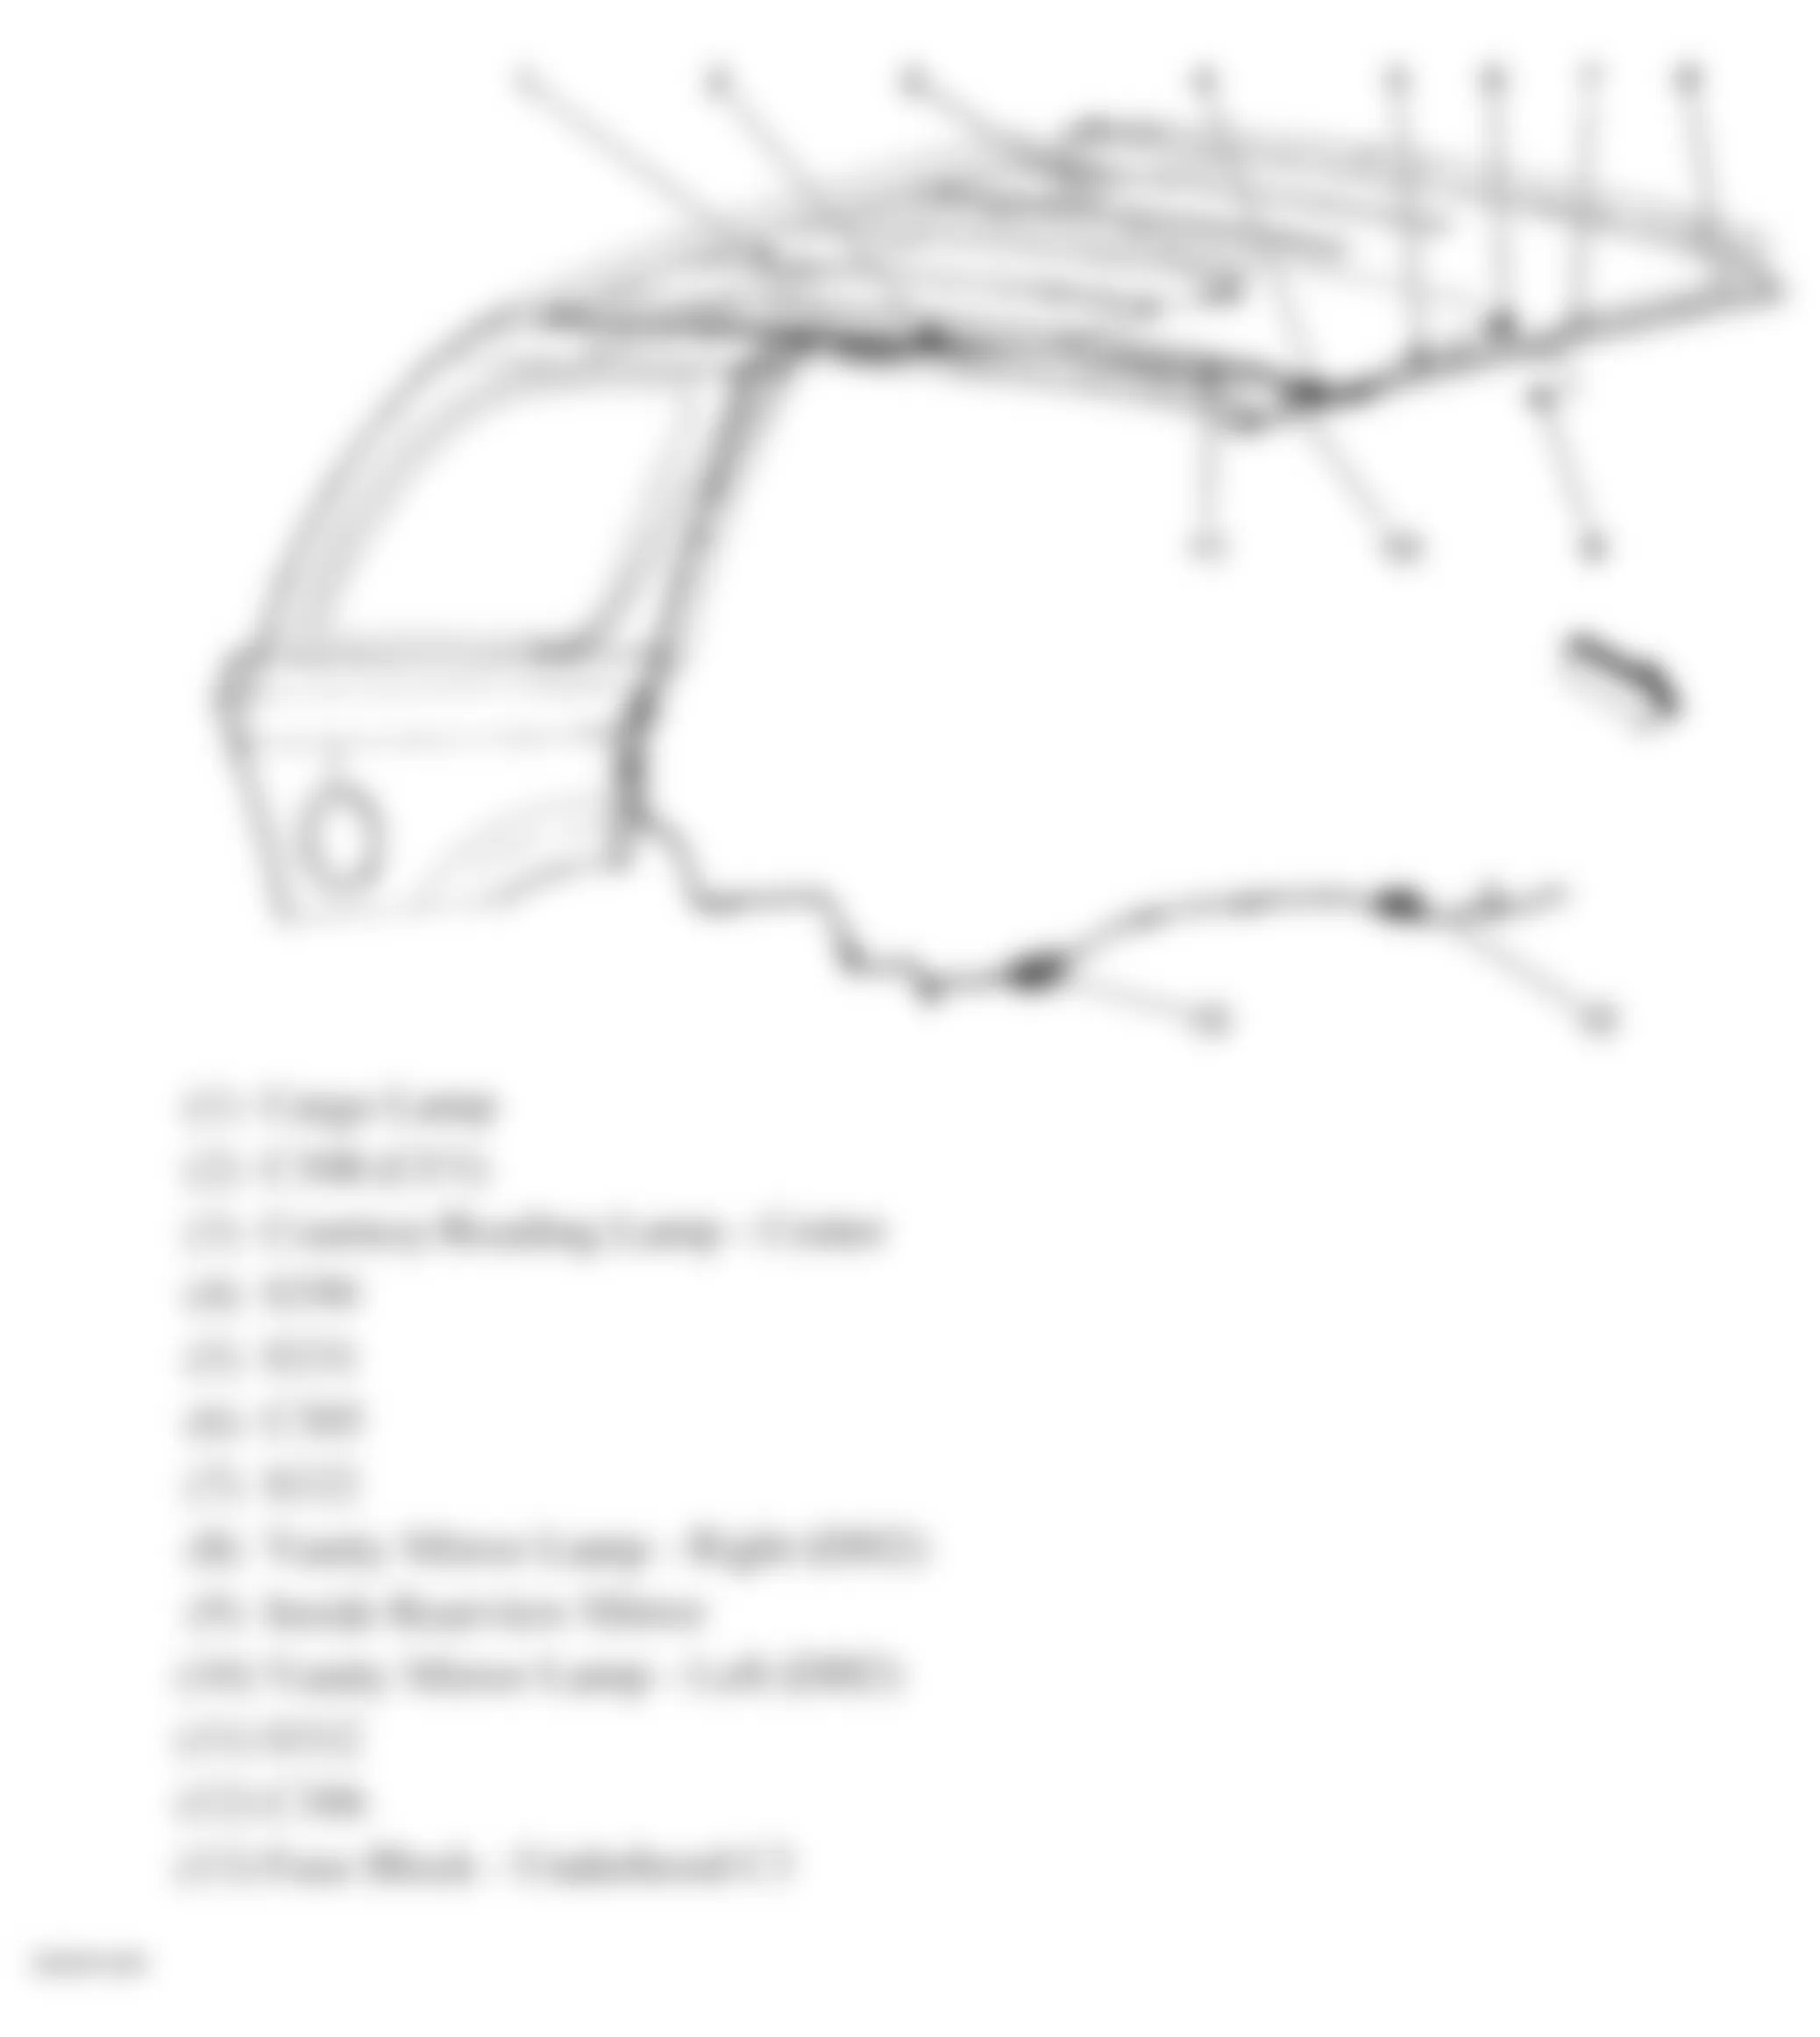 GMC Envoy 2007 - Component Locations -  Headliner Harness Routing